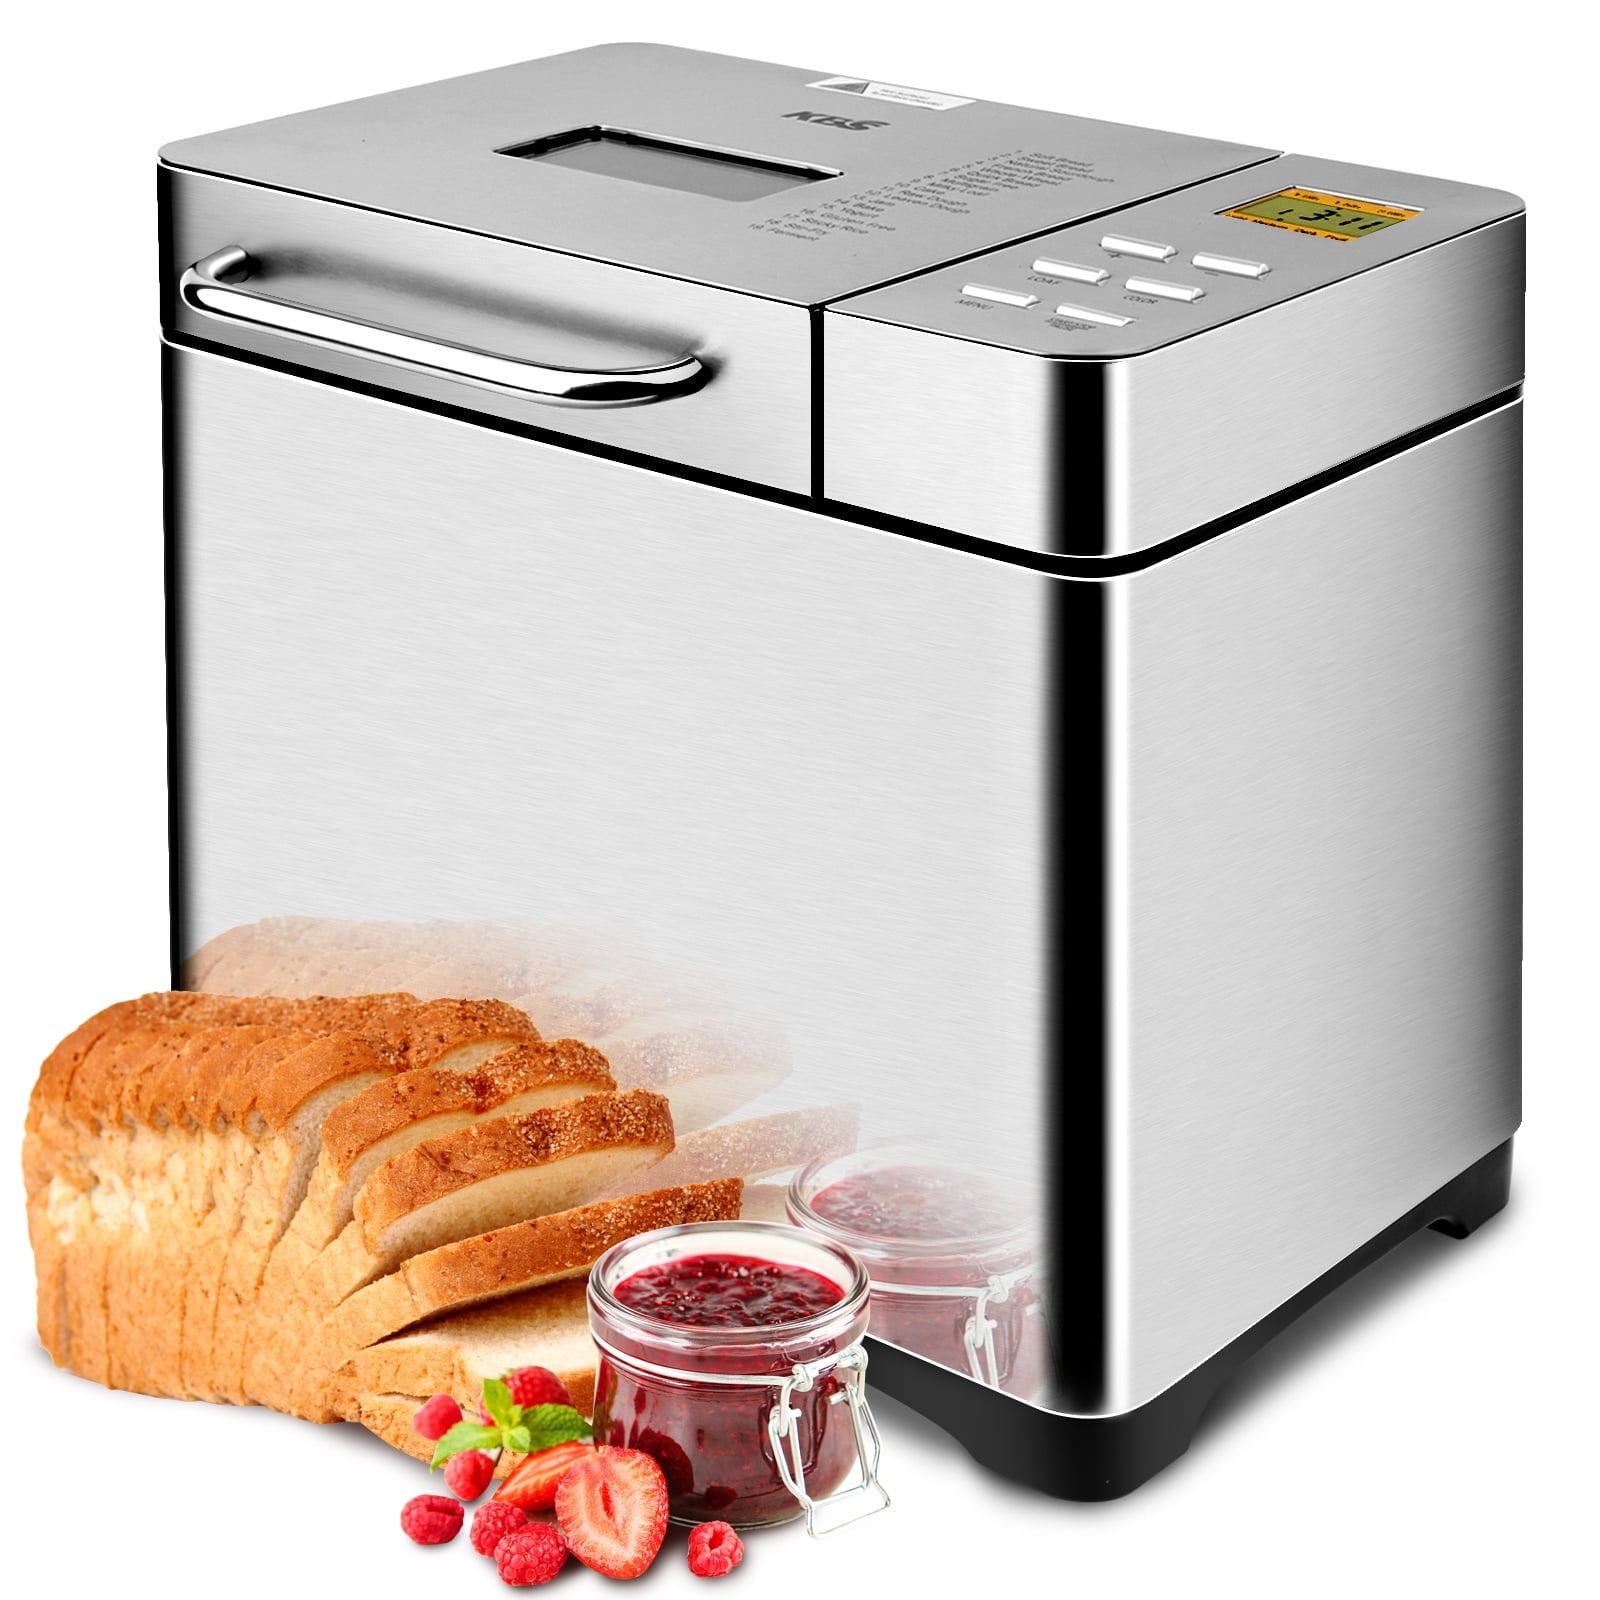 https://ak1.ostkcdn.com/images/products/is/images/direct/9ce12ef2dc69731448d1446c0c3e895f88479553/17-In-1-2LB-Bread-Maker-Machine-Fully-Automatic-LCD-Display%EF%BC%8CStainless-Steel-Model%23-013.jpg